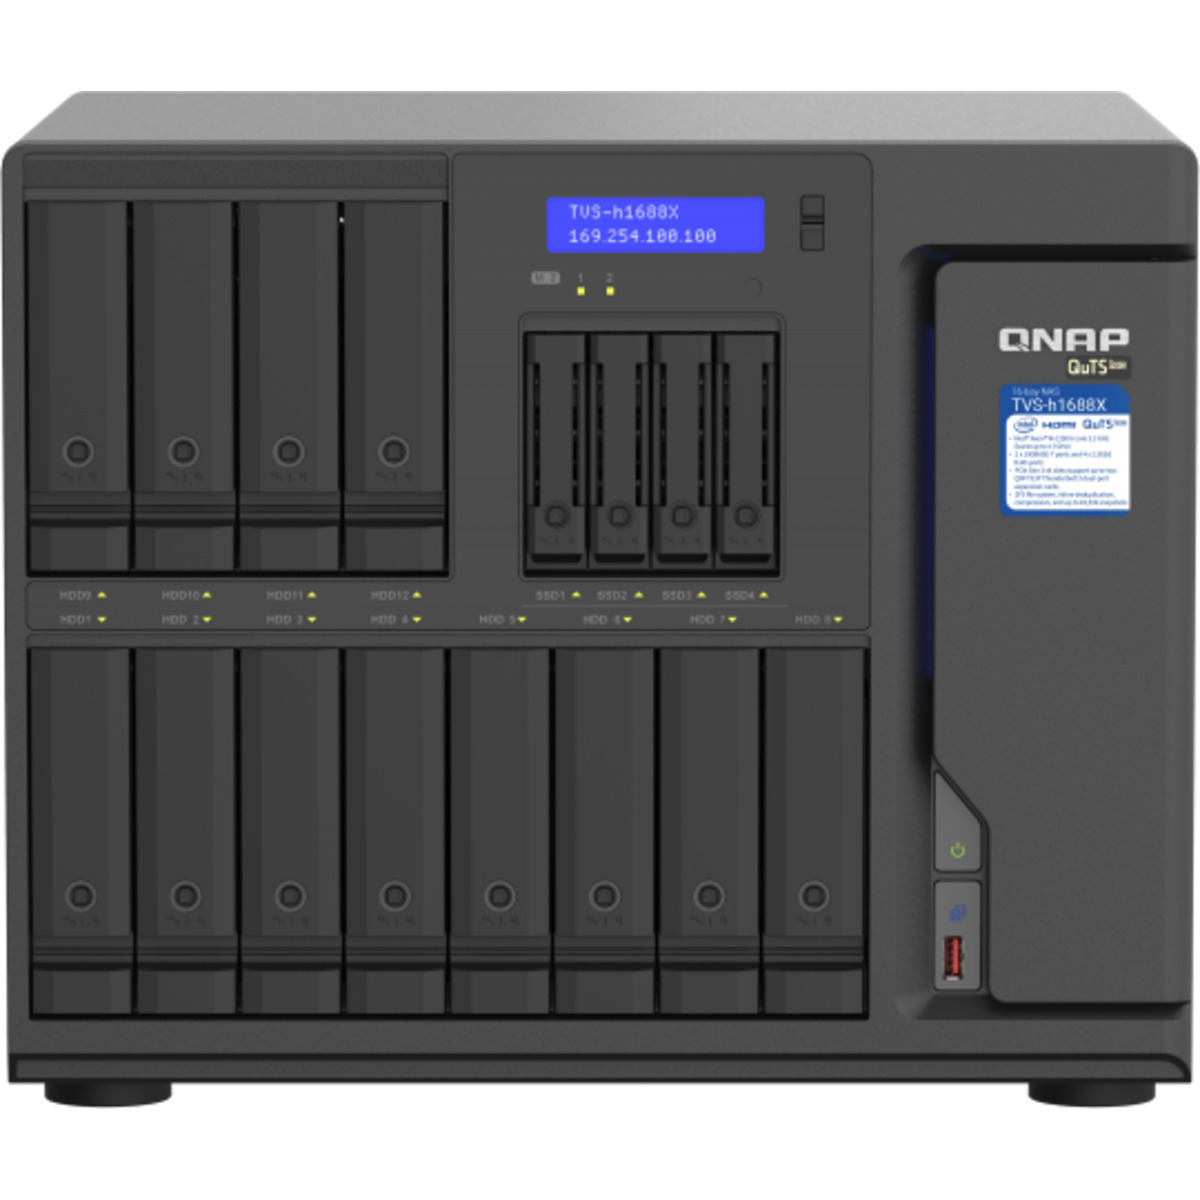 QNAP TVS-h1688X QuTS hero NAS Desktop 12+4-Bay Multimedia / Power User / Business NAS - Network Attached Storage Device Burn-In Tested Configurations TVS-h1688X QuTS hero NAS